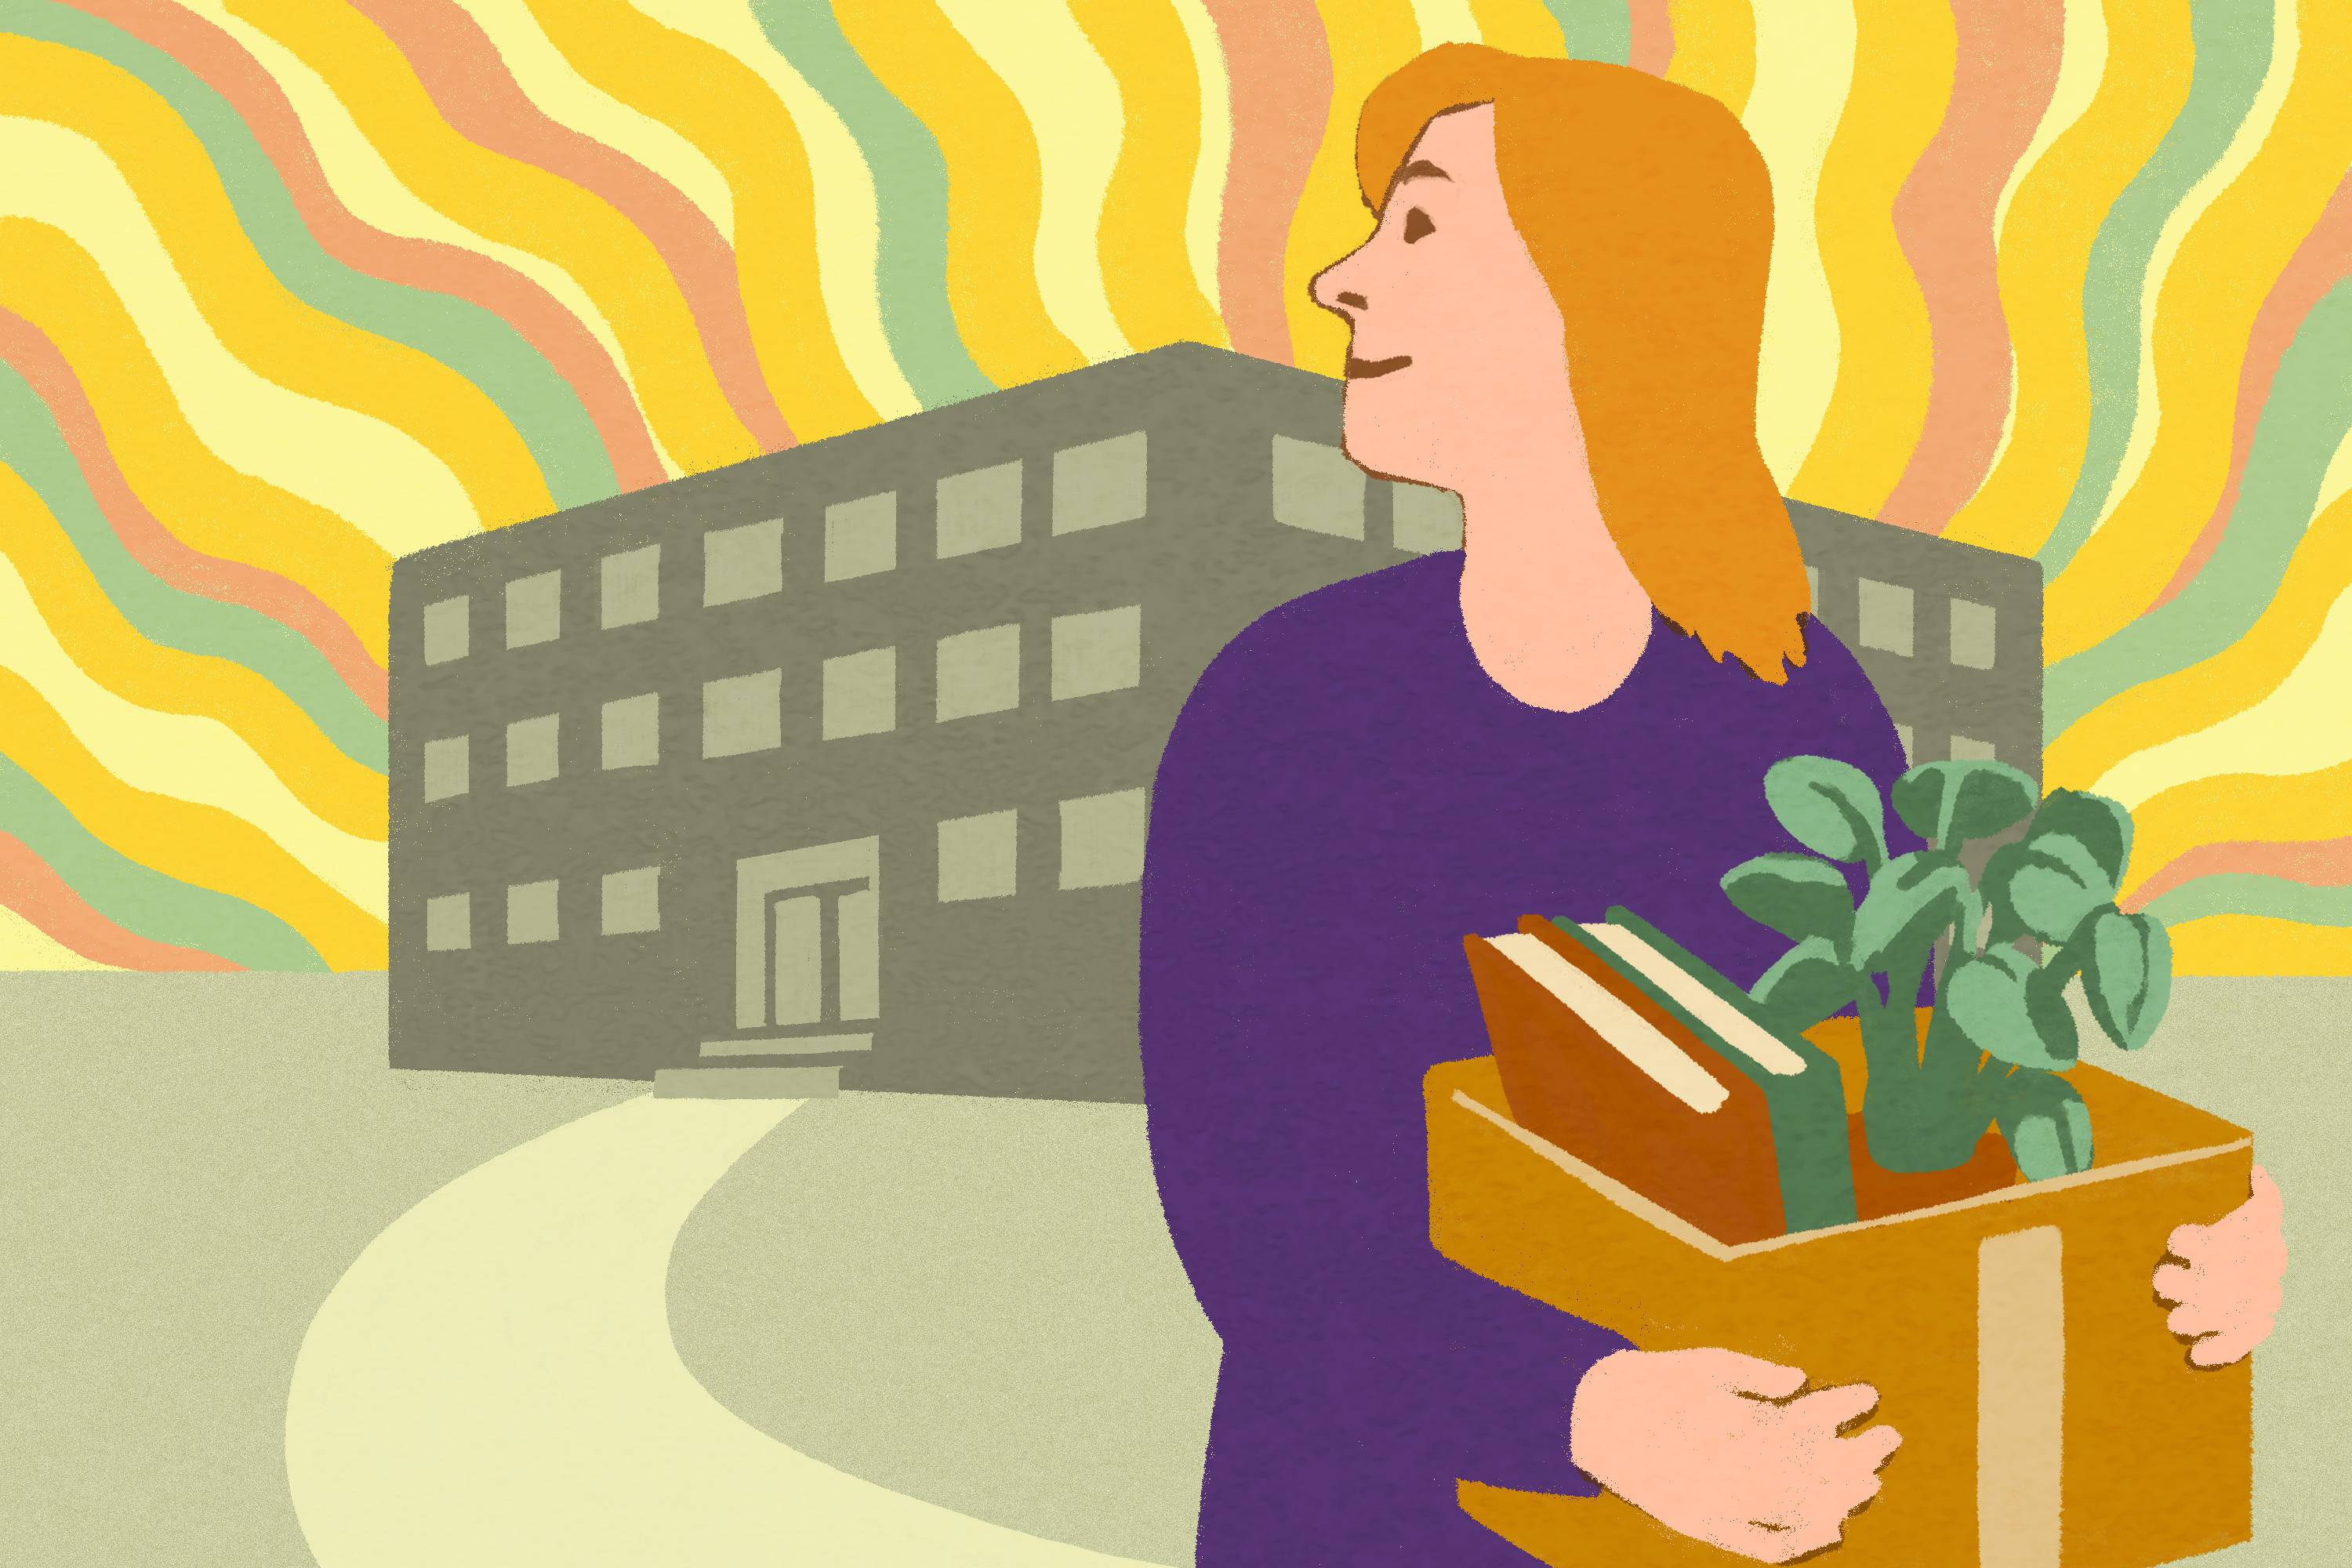 Illustration of woman who holds cardboard box of books and potted plant, and looks back over shoulder at school building that radiates bright, cheery colored wavy lines.